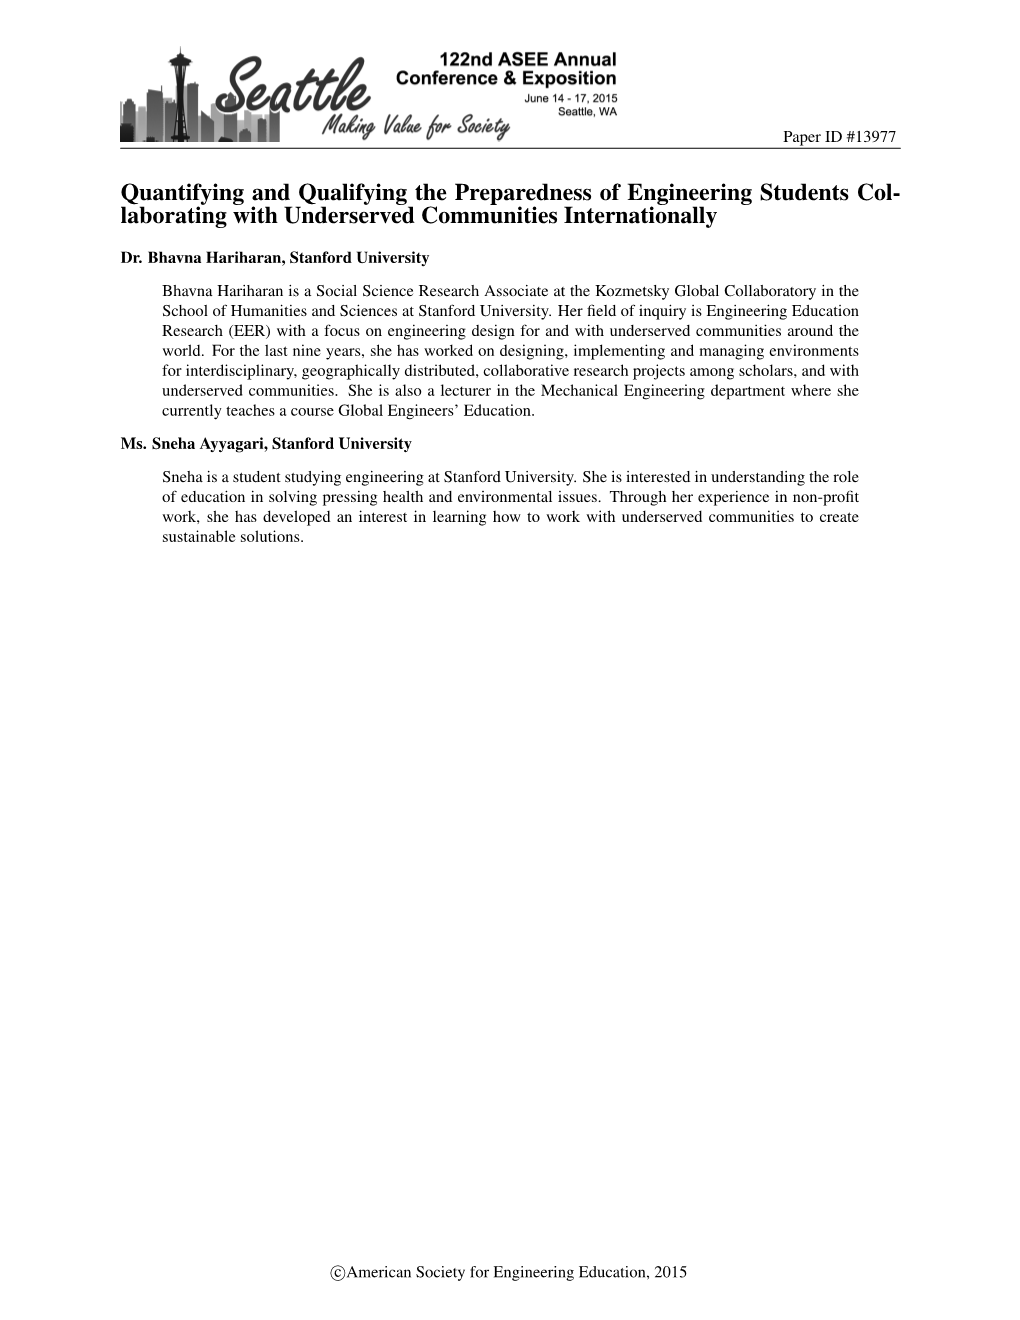 Quantifying and Qualifying the Preparedness of Engineering Students Col- Laborating with Underserved Communities Internationally